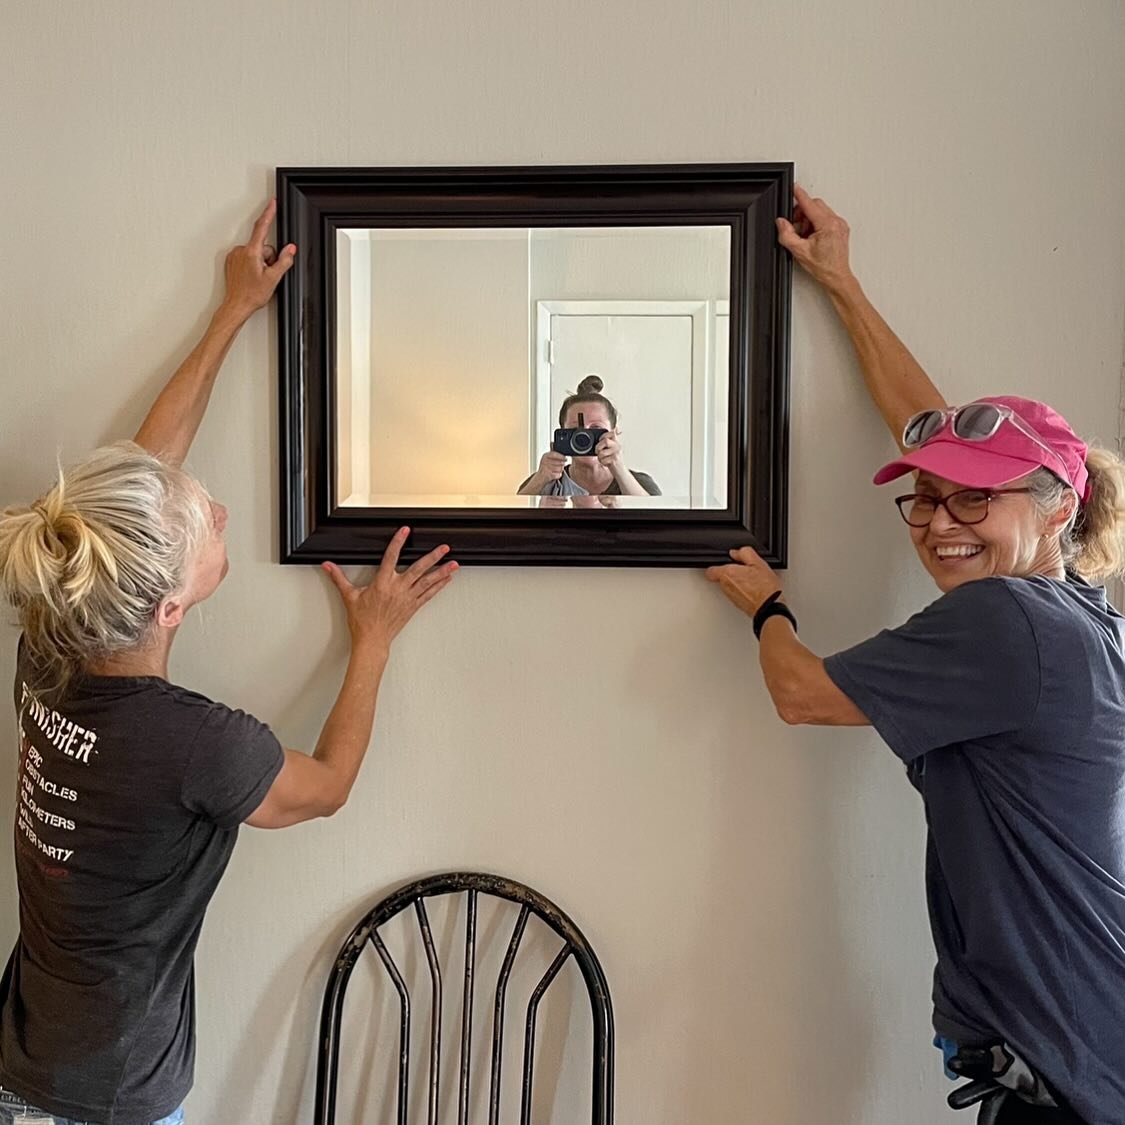 We always need (light weight!) mirrors for the entry! 

#volunteer #nonprofitorganization #giveback #love #education #support #fundraising  #socialgood #rdogood #ngo #change #givingback #philanthropy #help #fundraiser #makeadifference #instagood #don